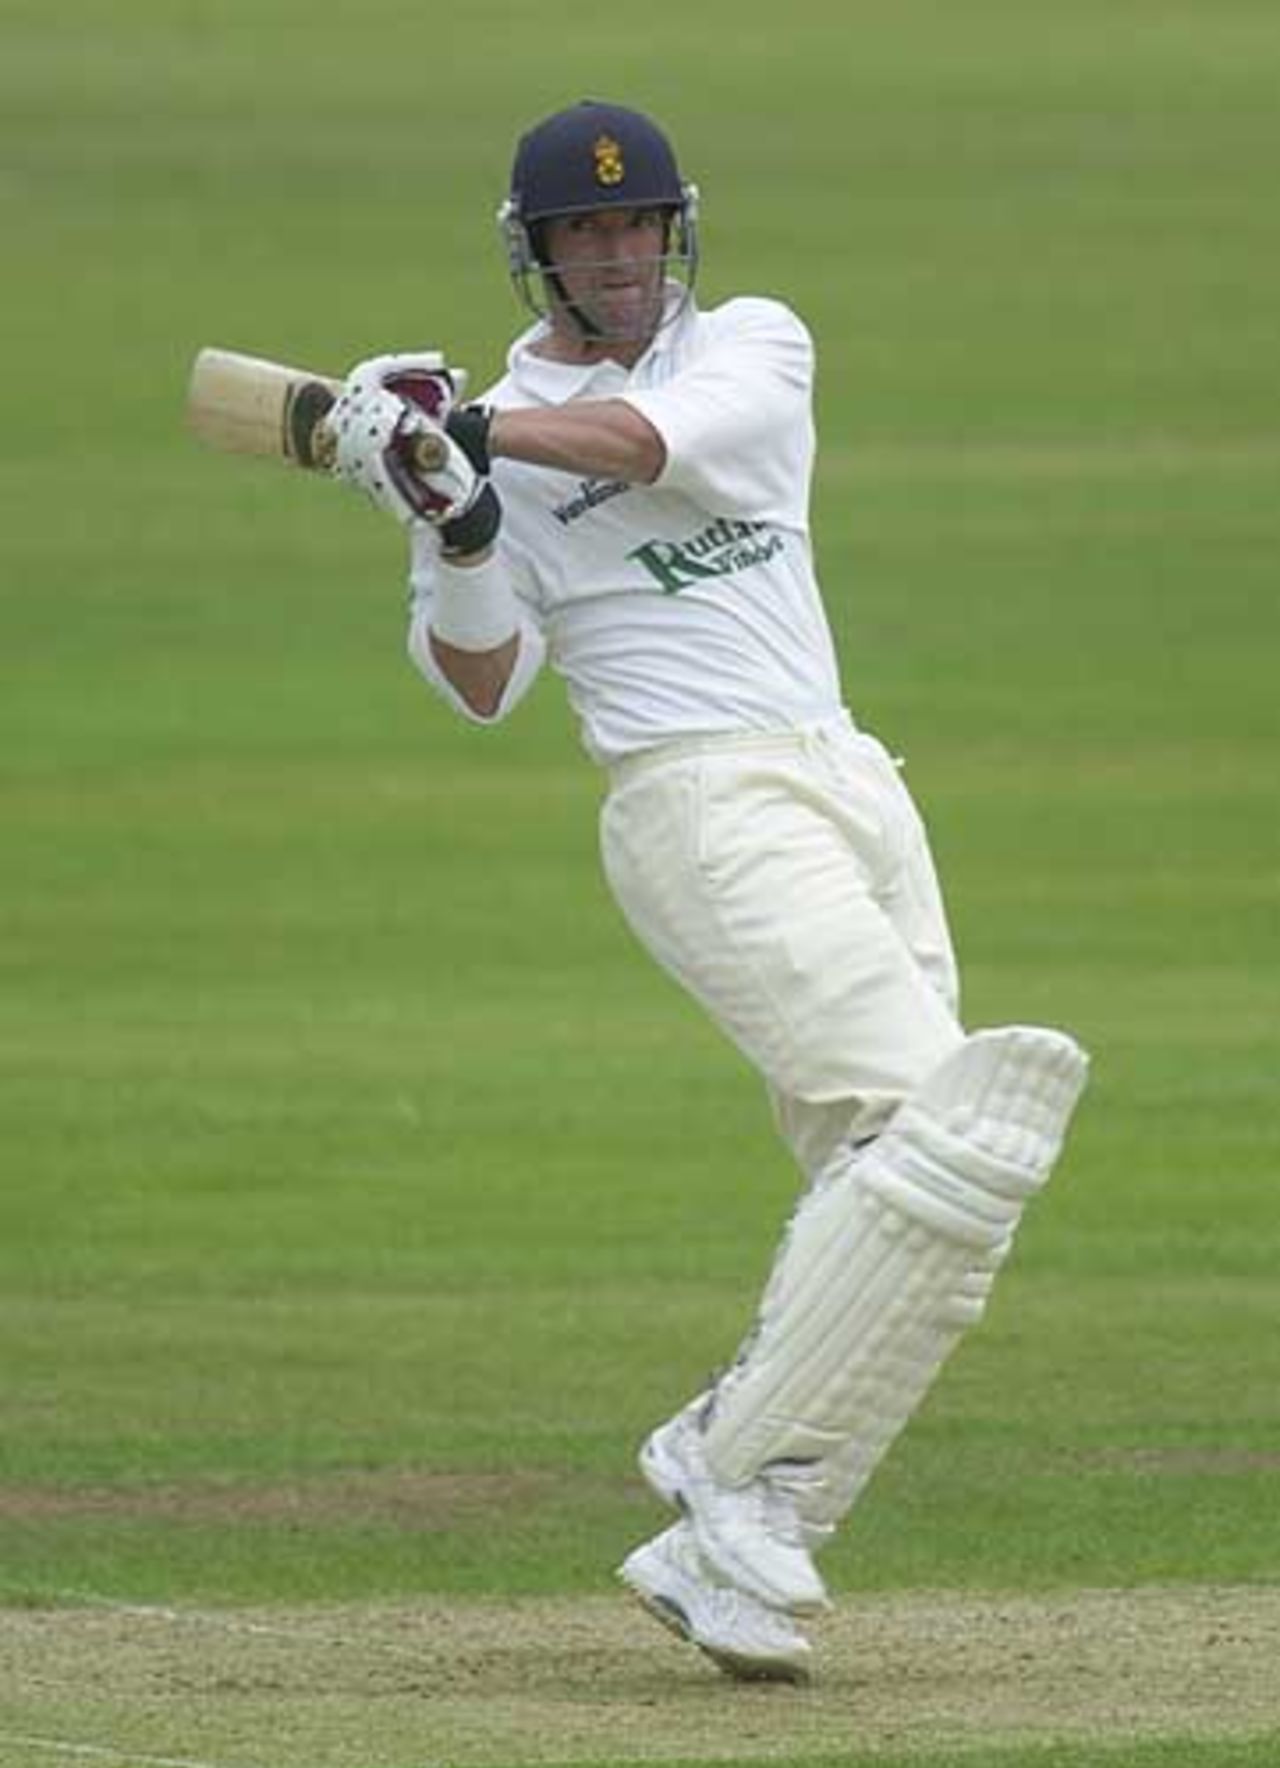 Michael DiVenuto with a pull shot in his innings of 91, Notts and Derby at the County Ground Derby